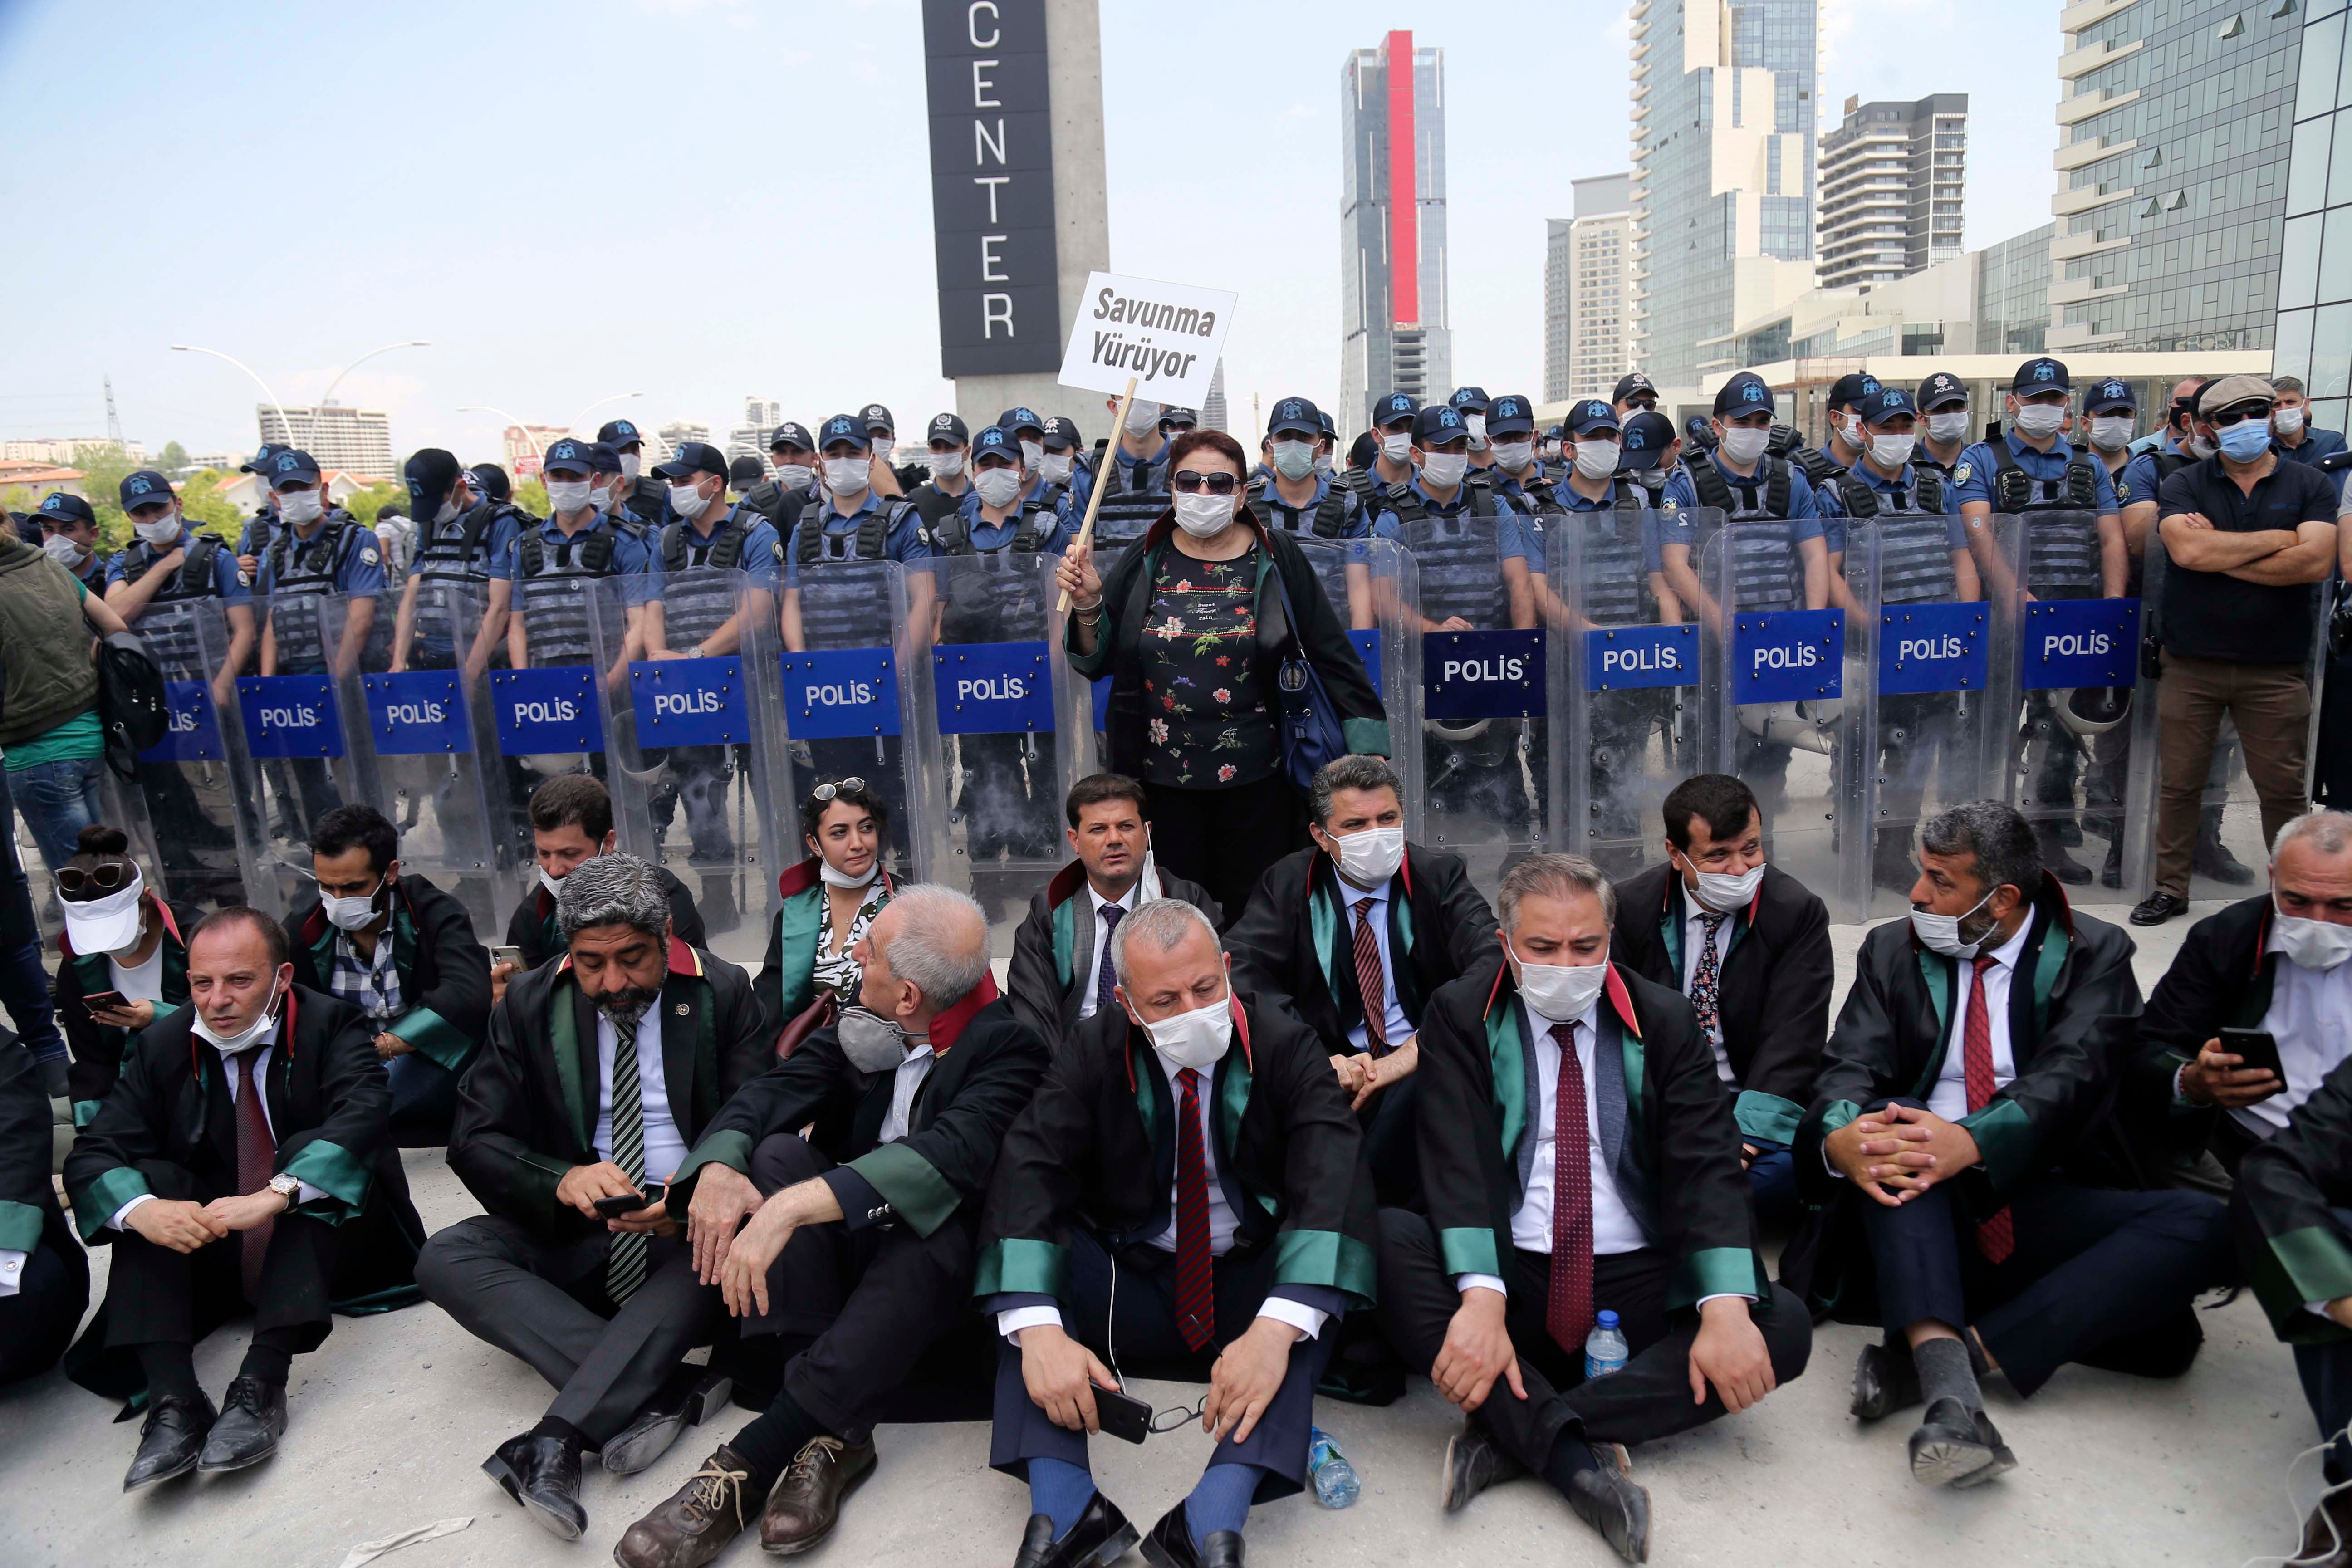 Chairs of Turkey’s provincial bar associations stage a sit-in demonstration after police blocked the group from marching to Ankara to protest a new draft law. The new law is set to divide the legal profession along political lines and has been strongly opposed by bar associations. June 22, 2020. © AP Photo